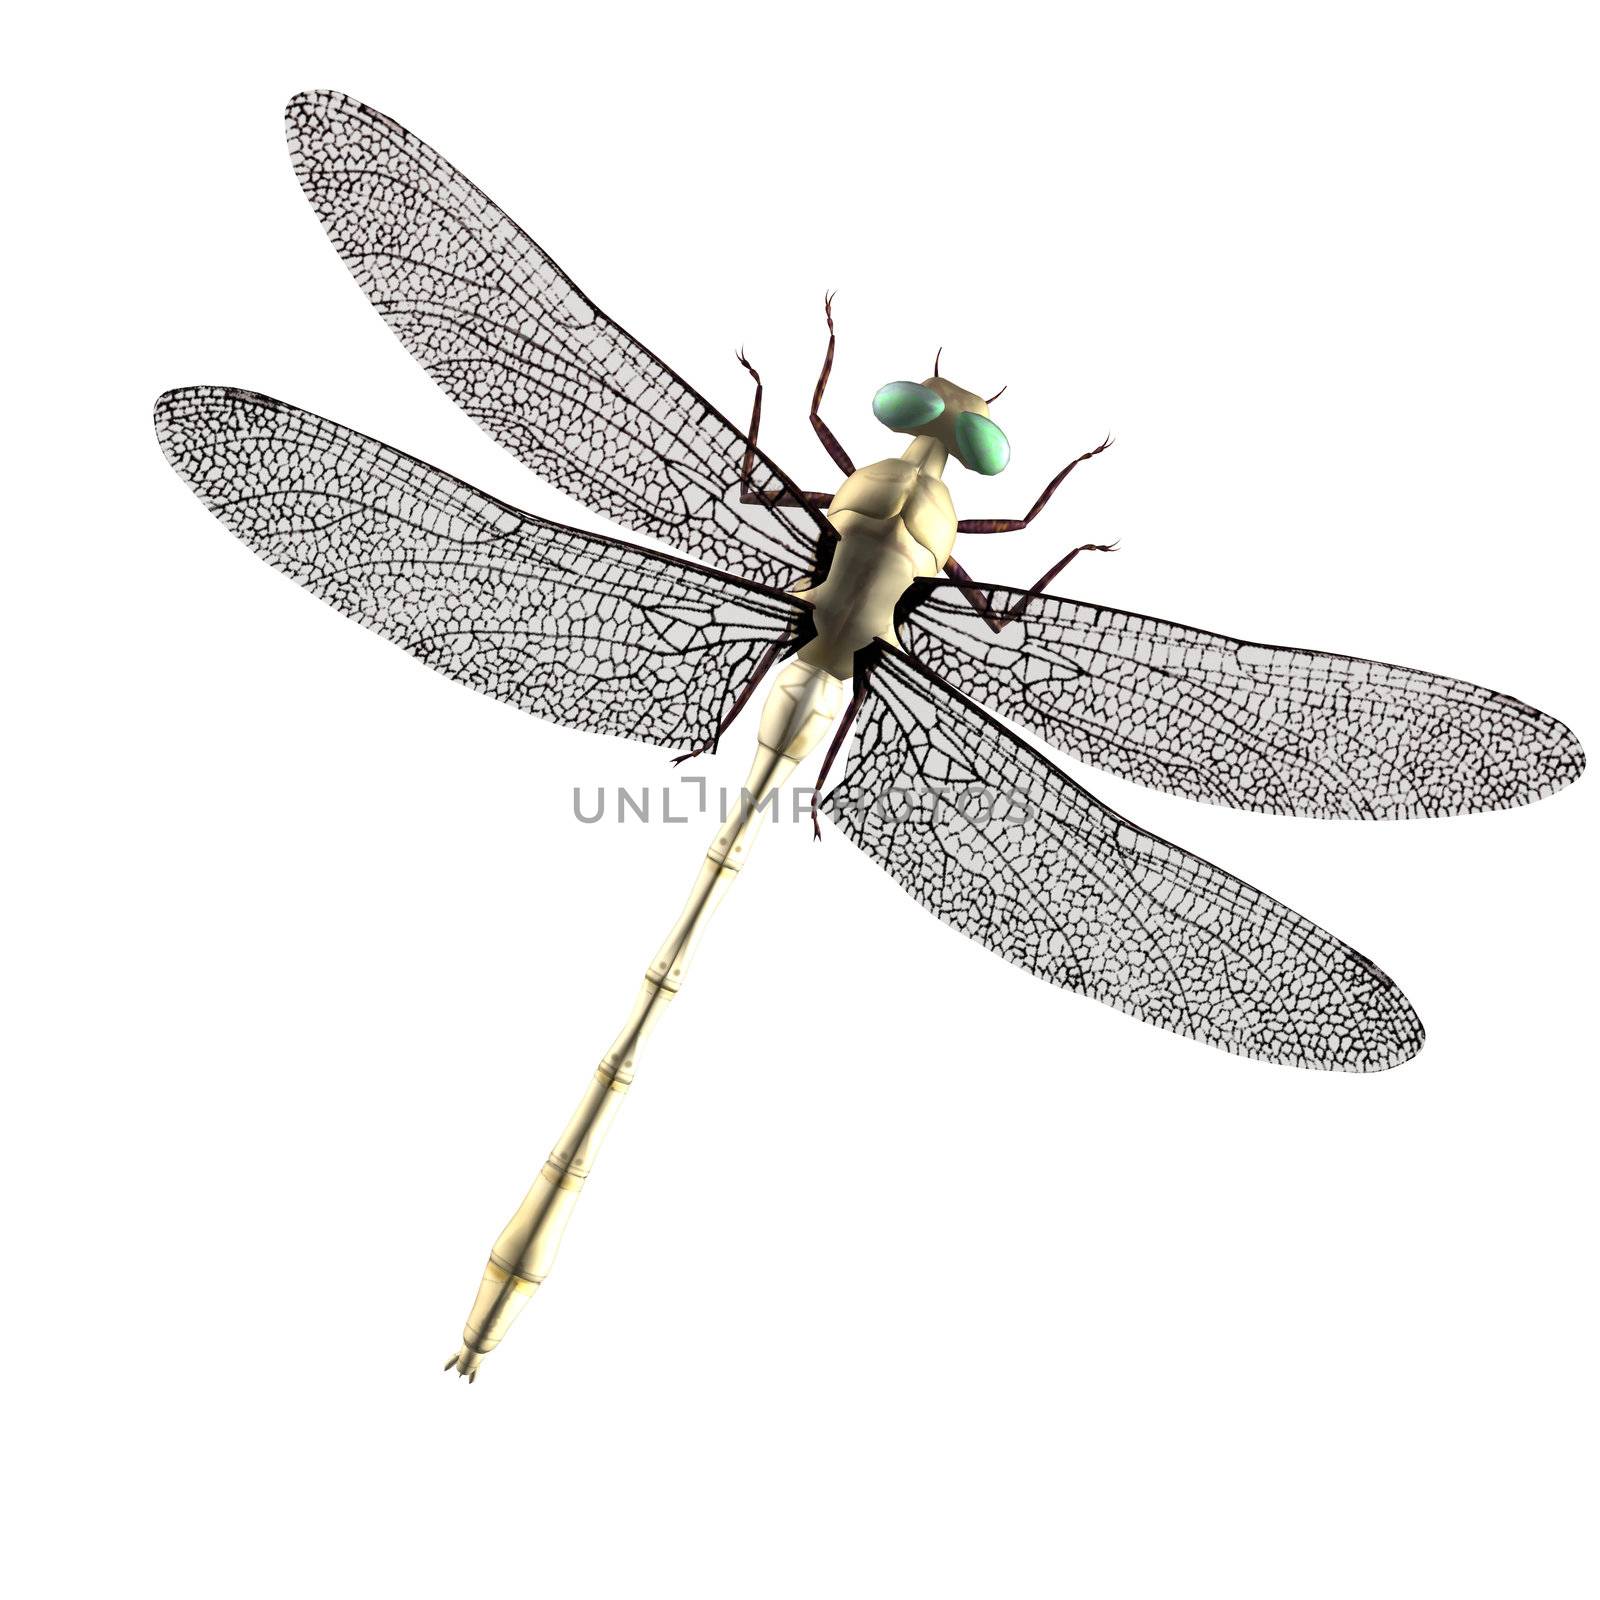 a dragonfly with green eyes and wings spread